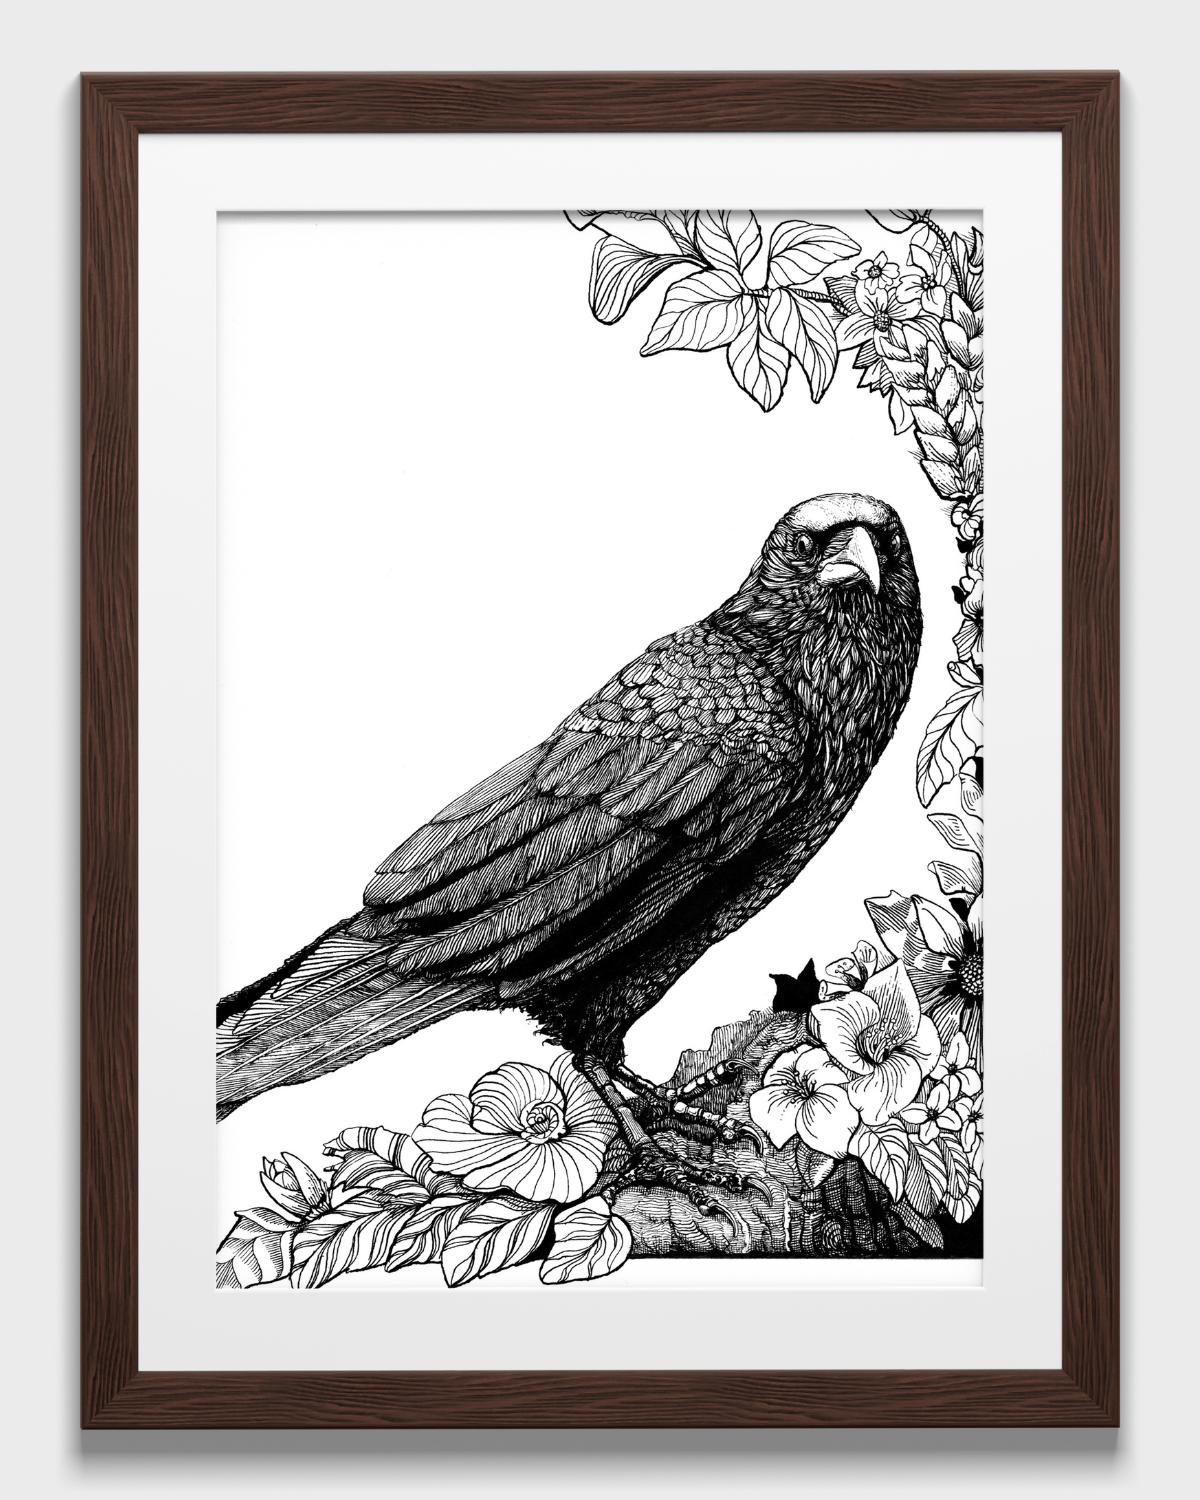 Framed drawing of a crow art print